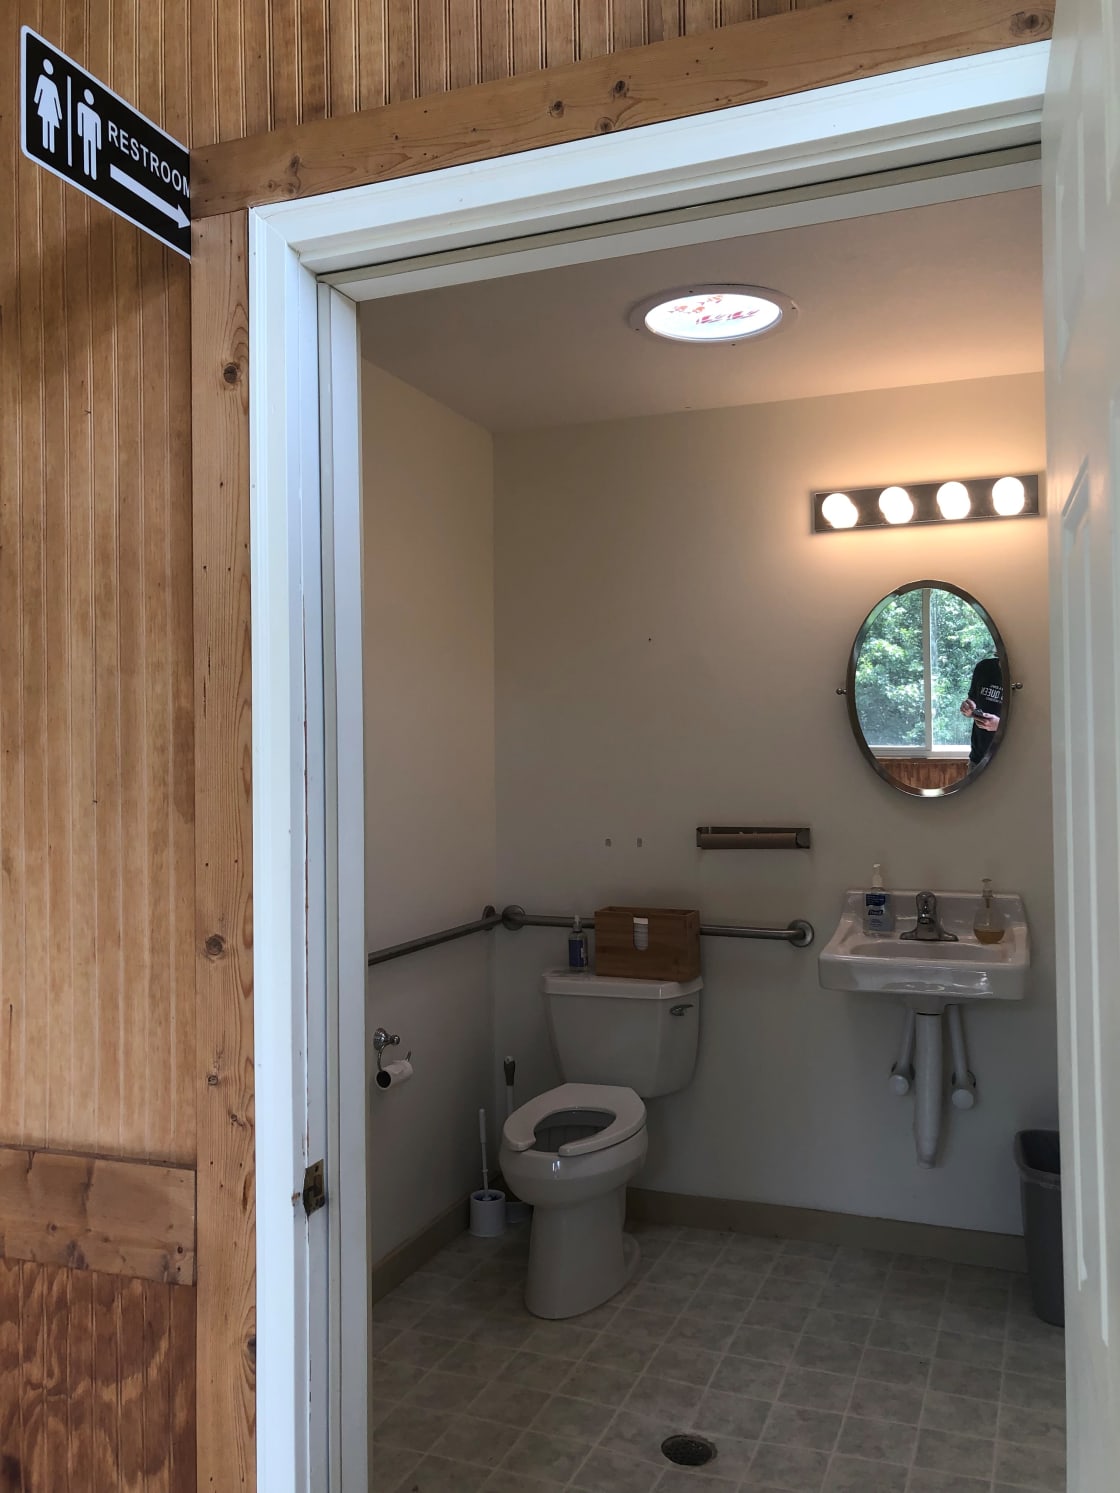 The bathroom is located at the back of the porch at the lodge.